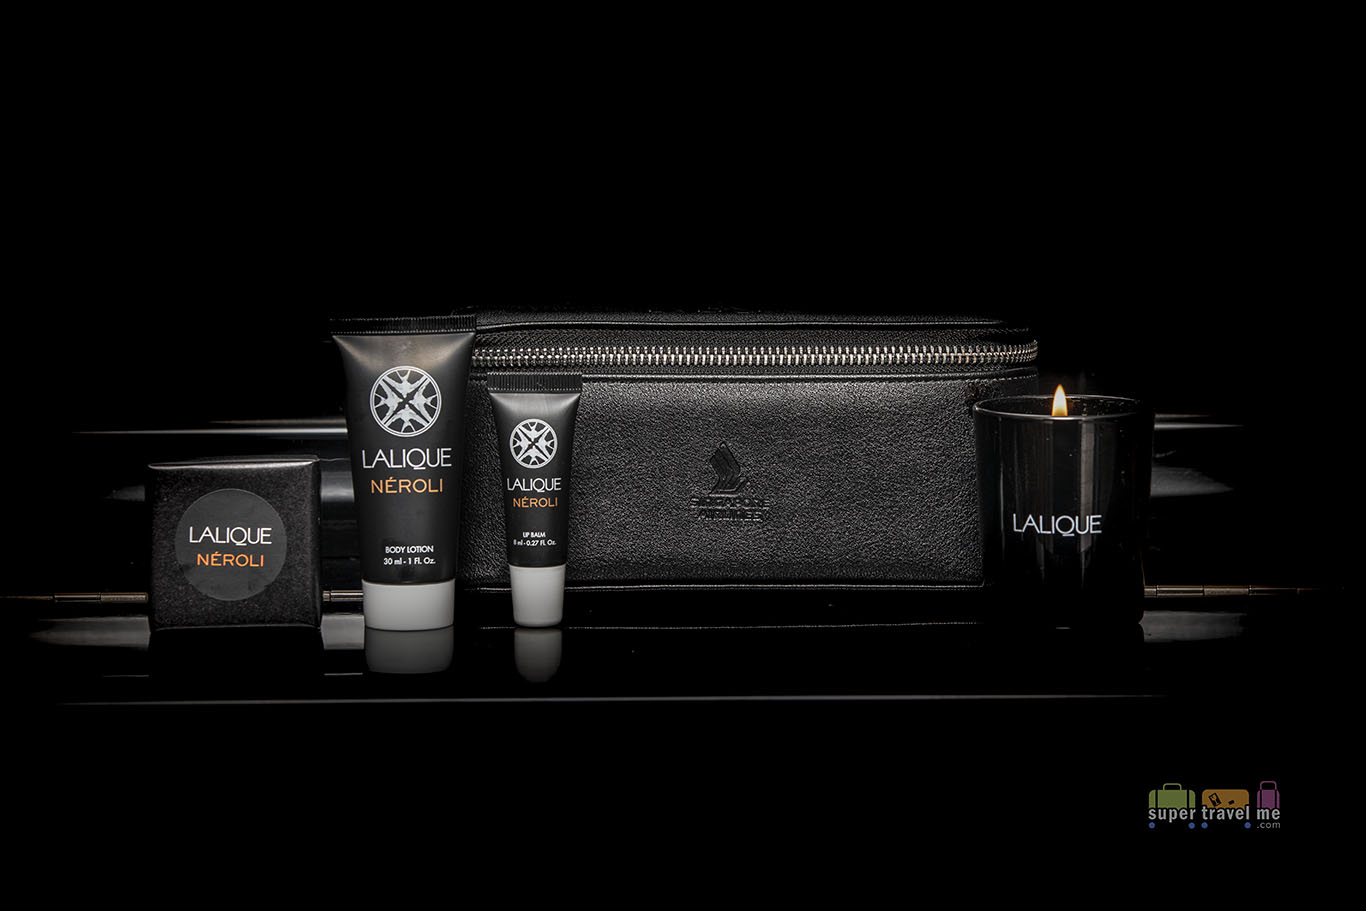 Singapore Airlines First Class Amenity Kit featuring Lalique products and candle